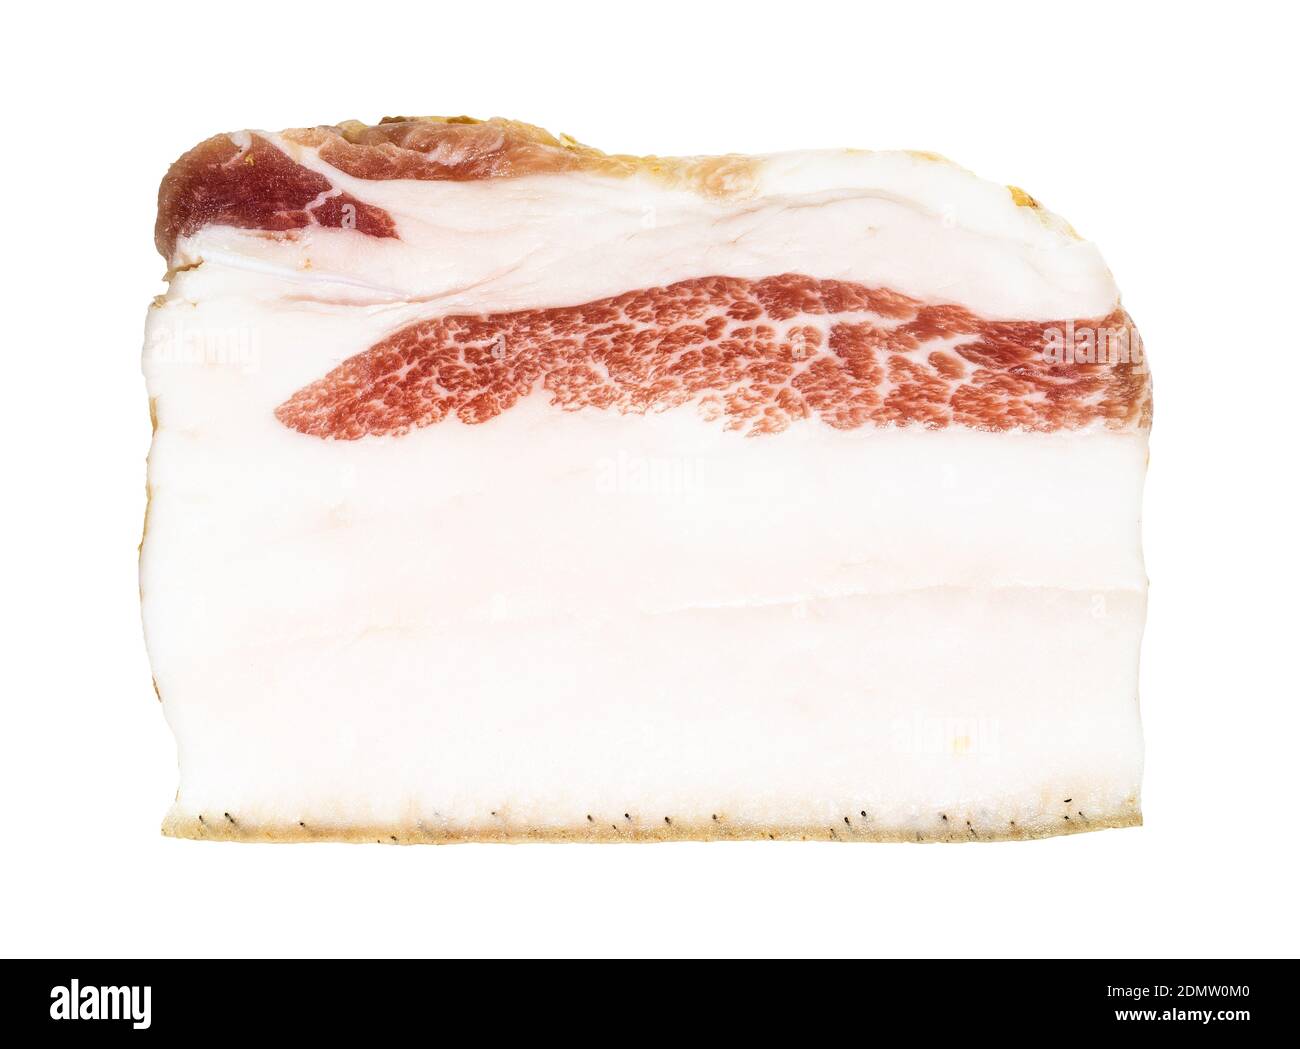 slice of Salo (salted pork fatback) with meat layer and skin isolated on white background Stock Photo